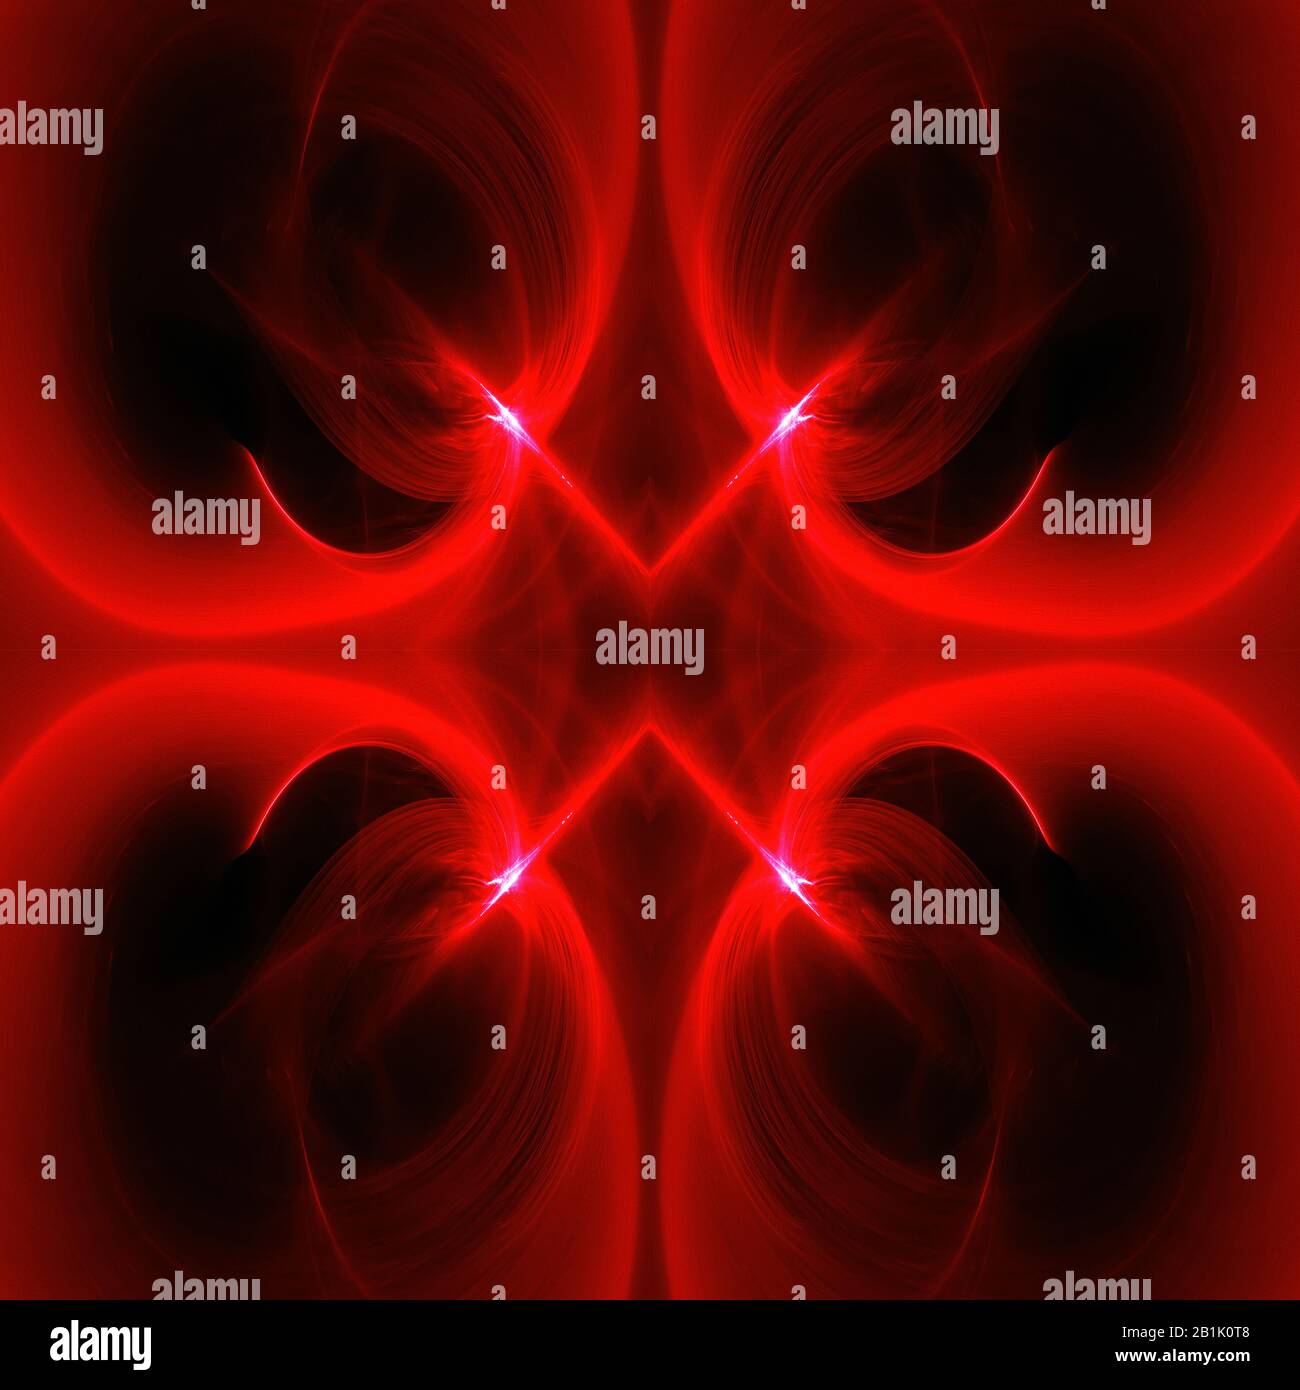 red circular wave glow. kaleidoscope lighting effect. abstract background for your business. Stock Photo